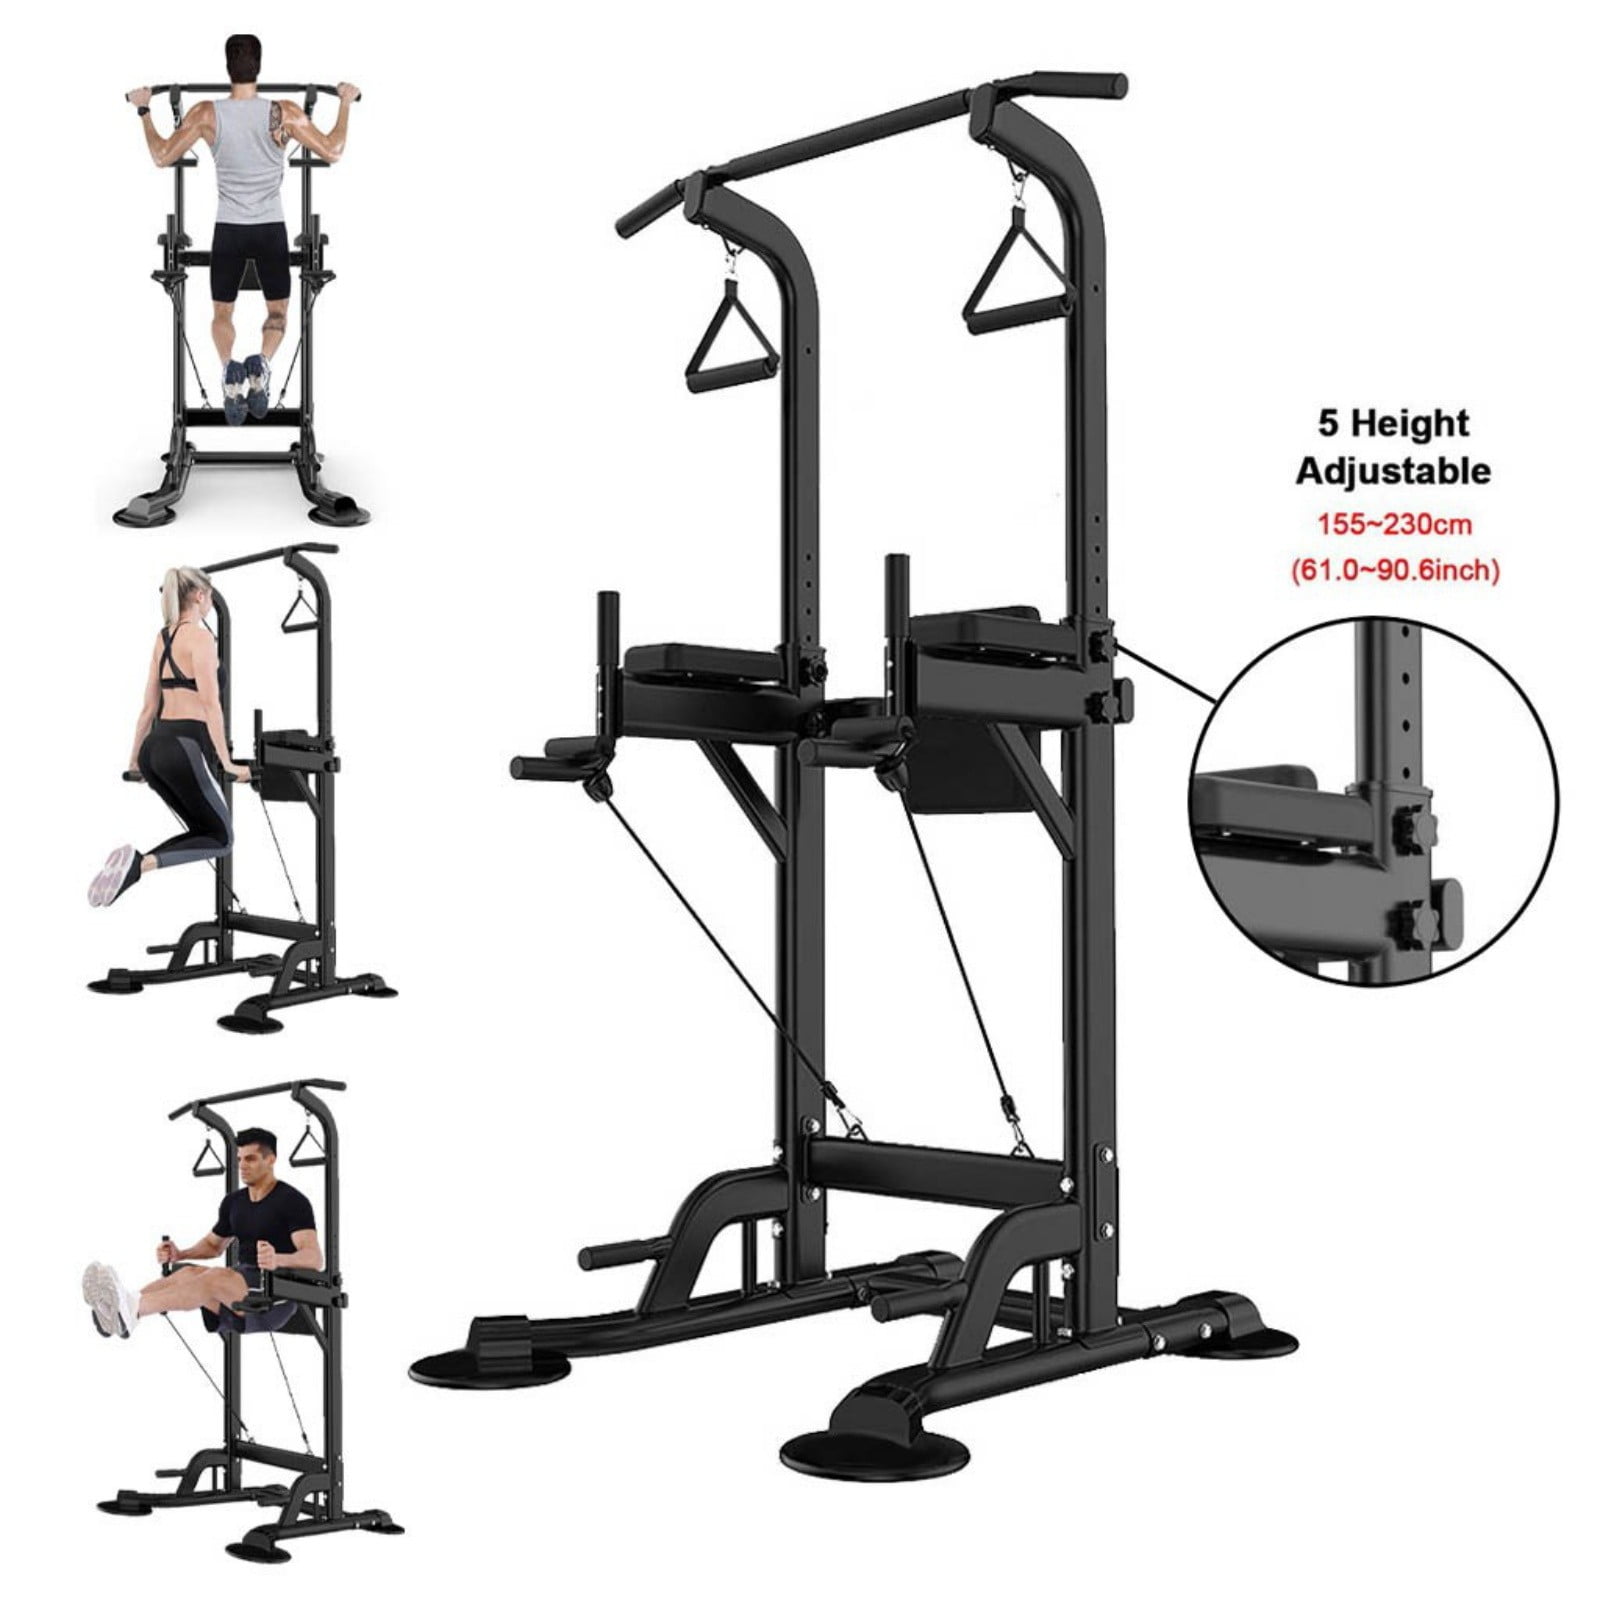 Home Dip Station Power Tower Pull Up Bar Strength Training Workout Equipment Gym 